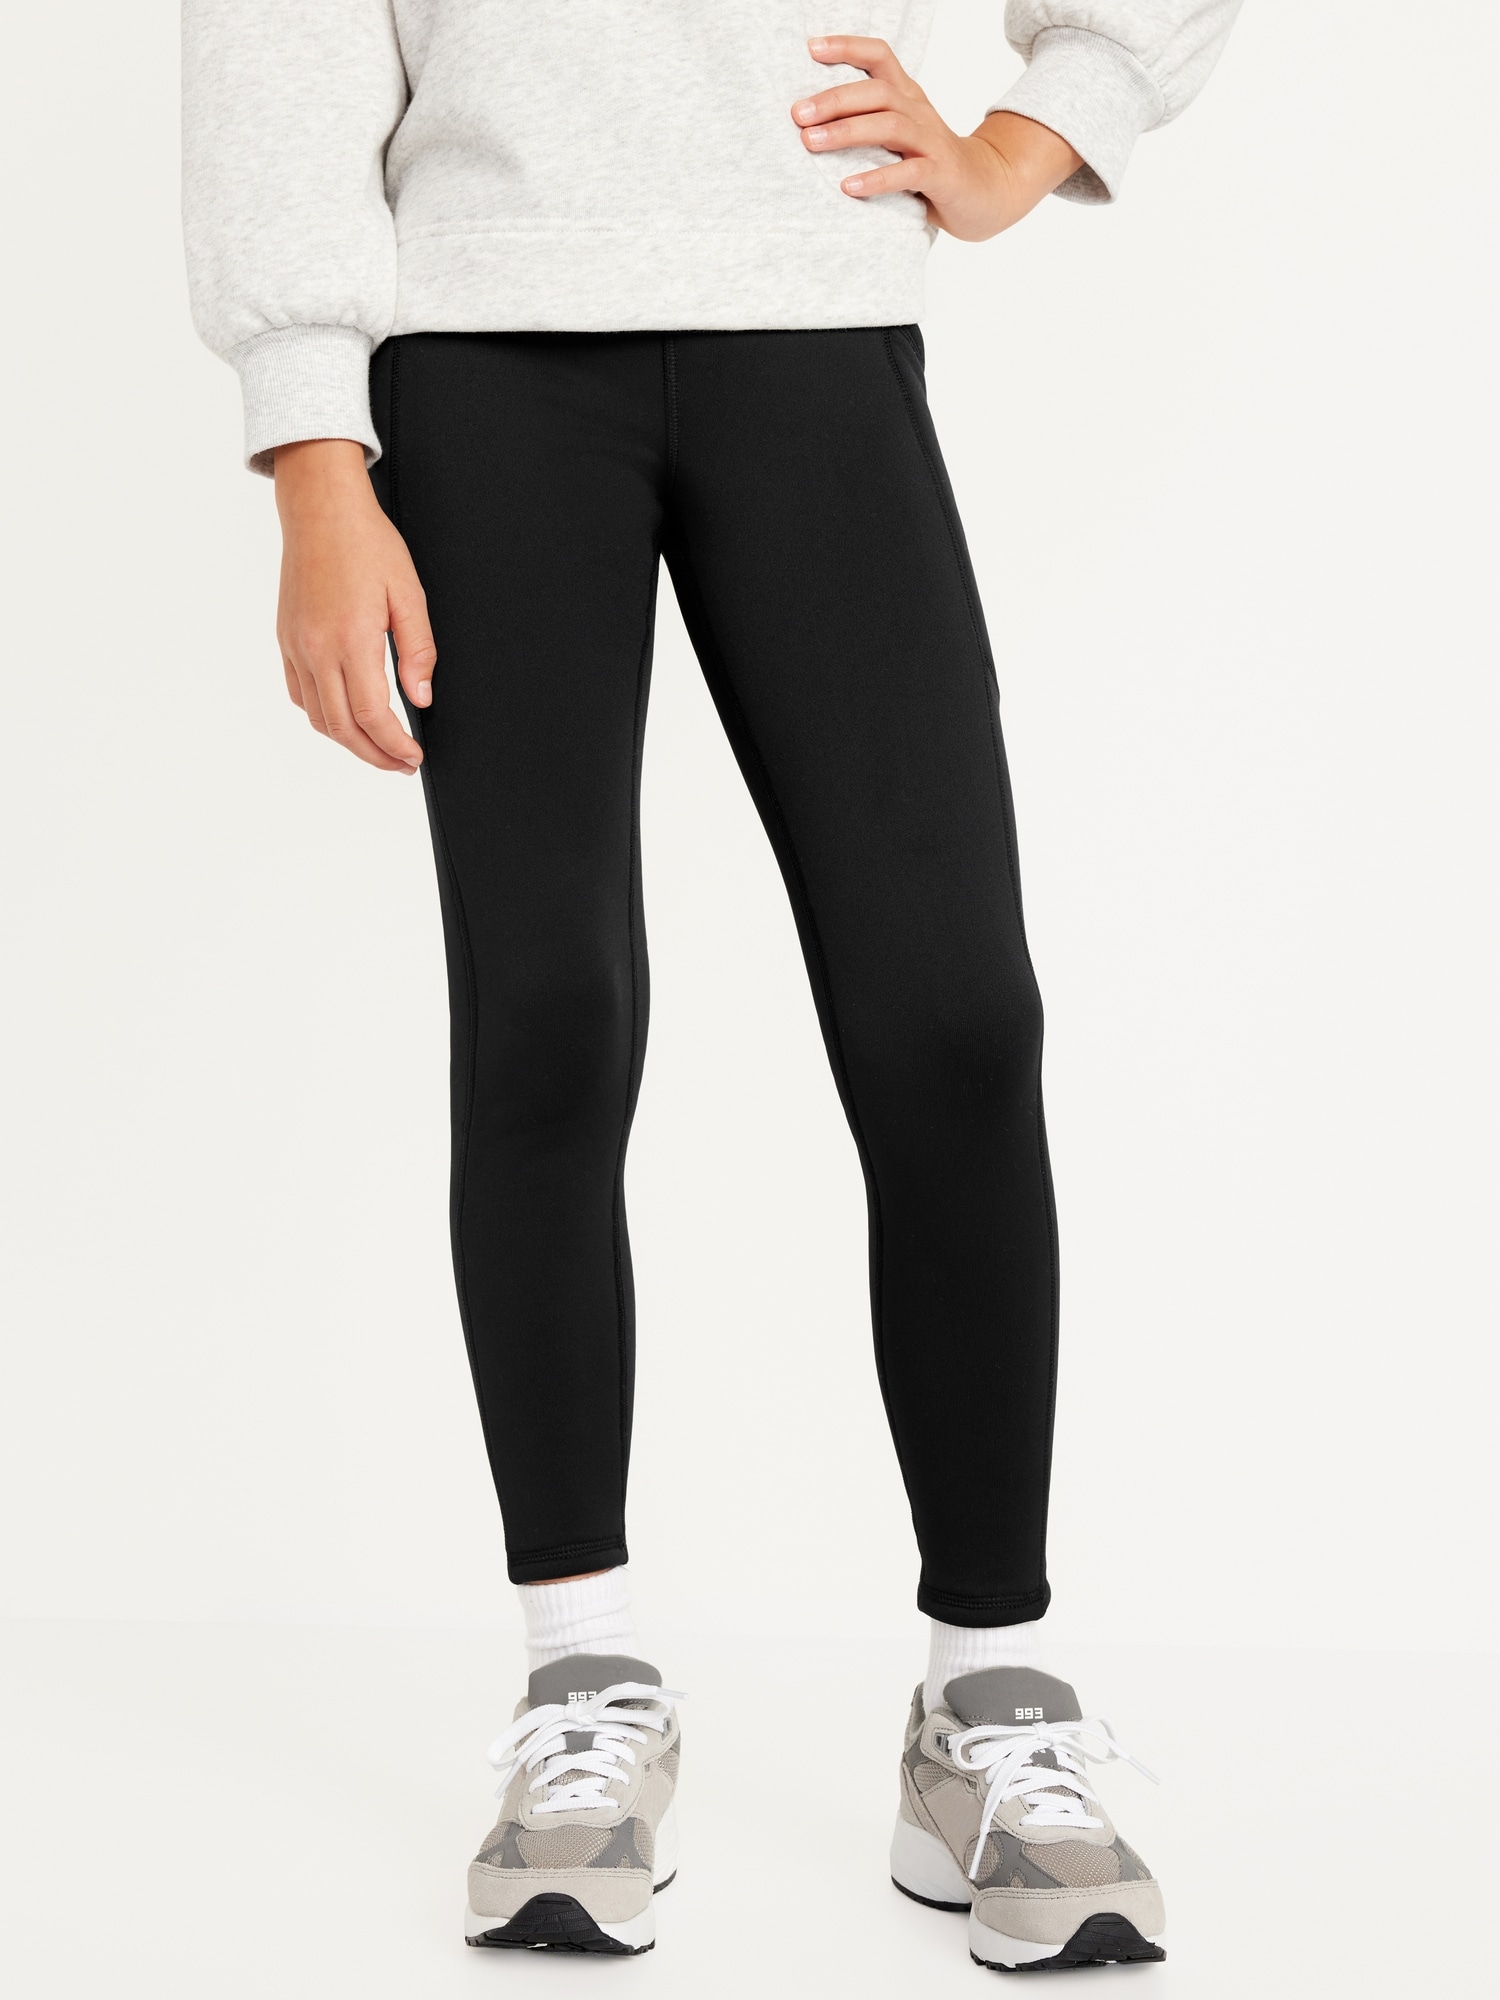 Stay stylish and comfortable with NVGTN Signature Mist Leggings